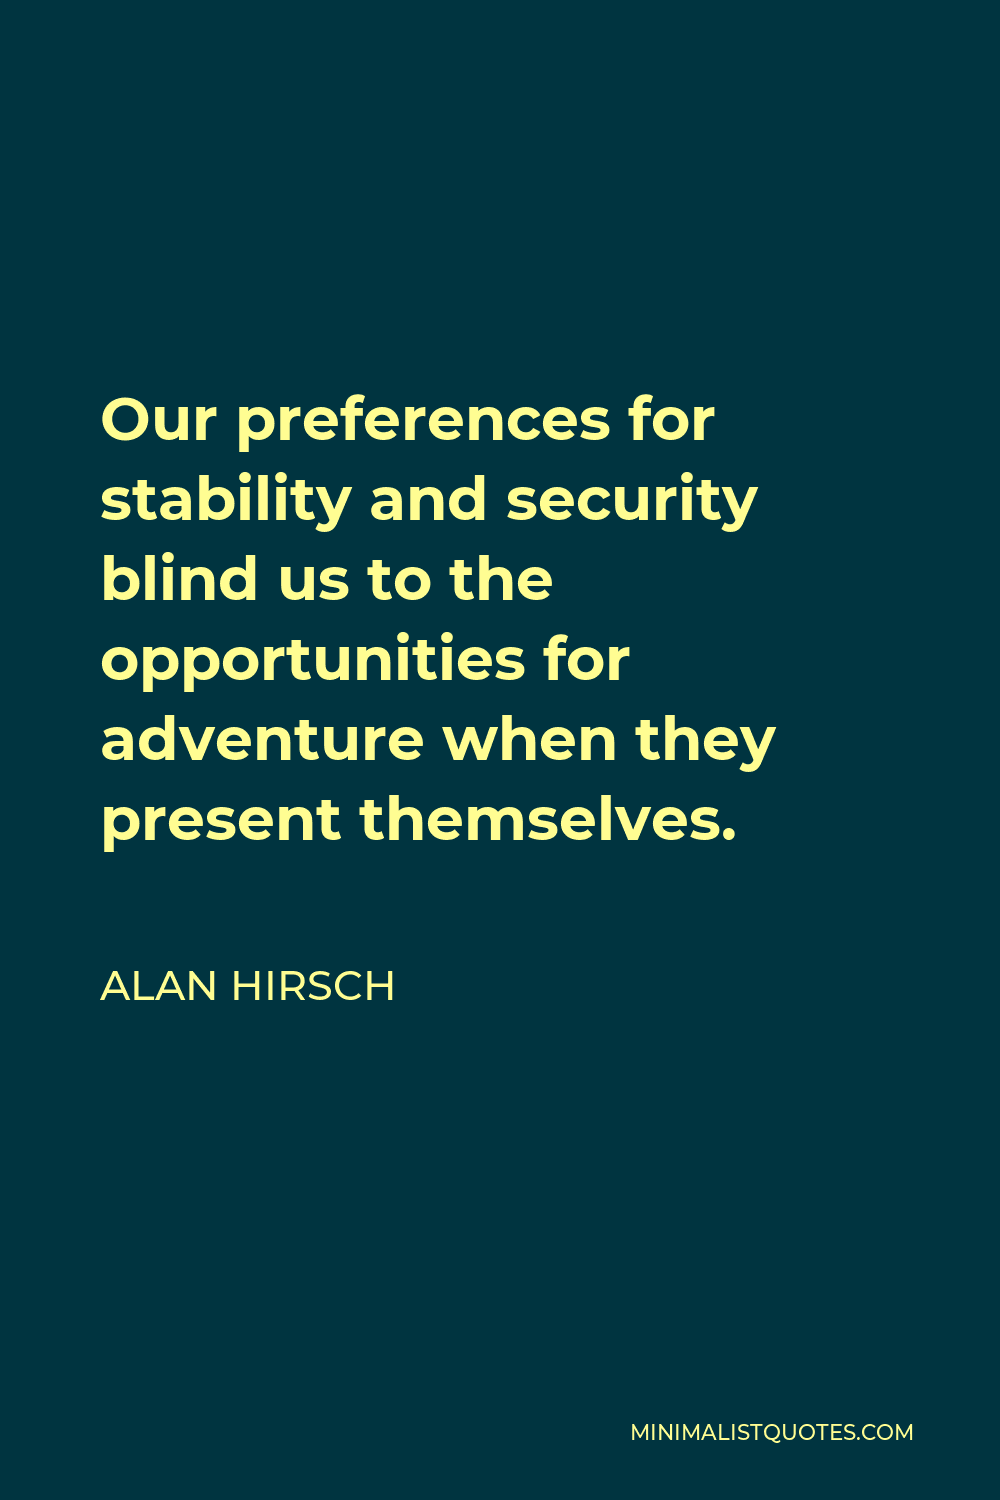 Alan Hirsch Quote - Our preferences for stability and security blind us to the opportunities for adventure when they present themselves.